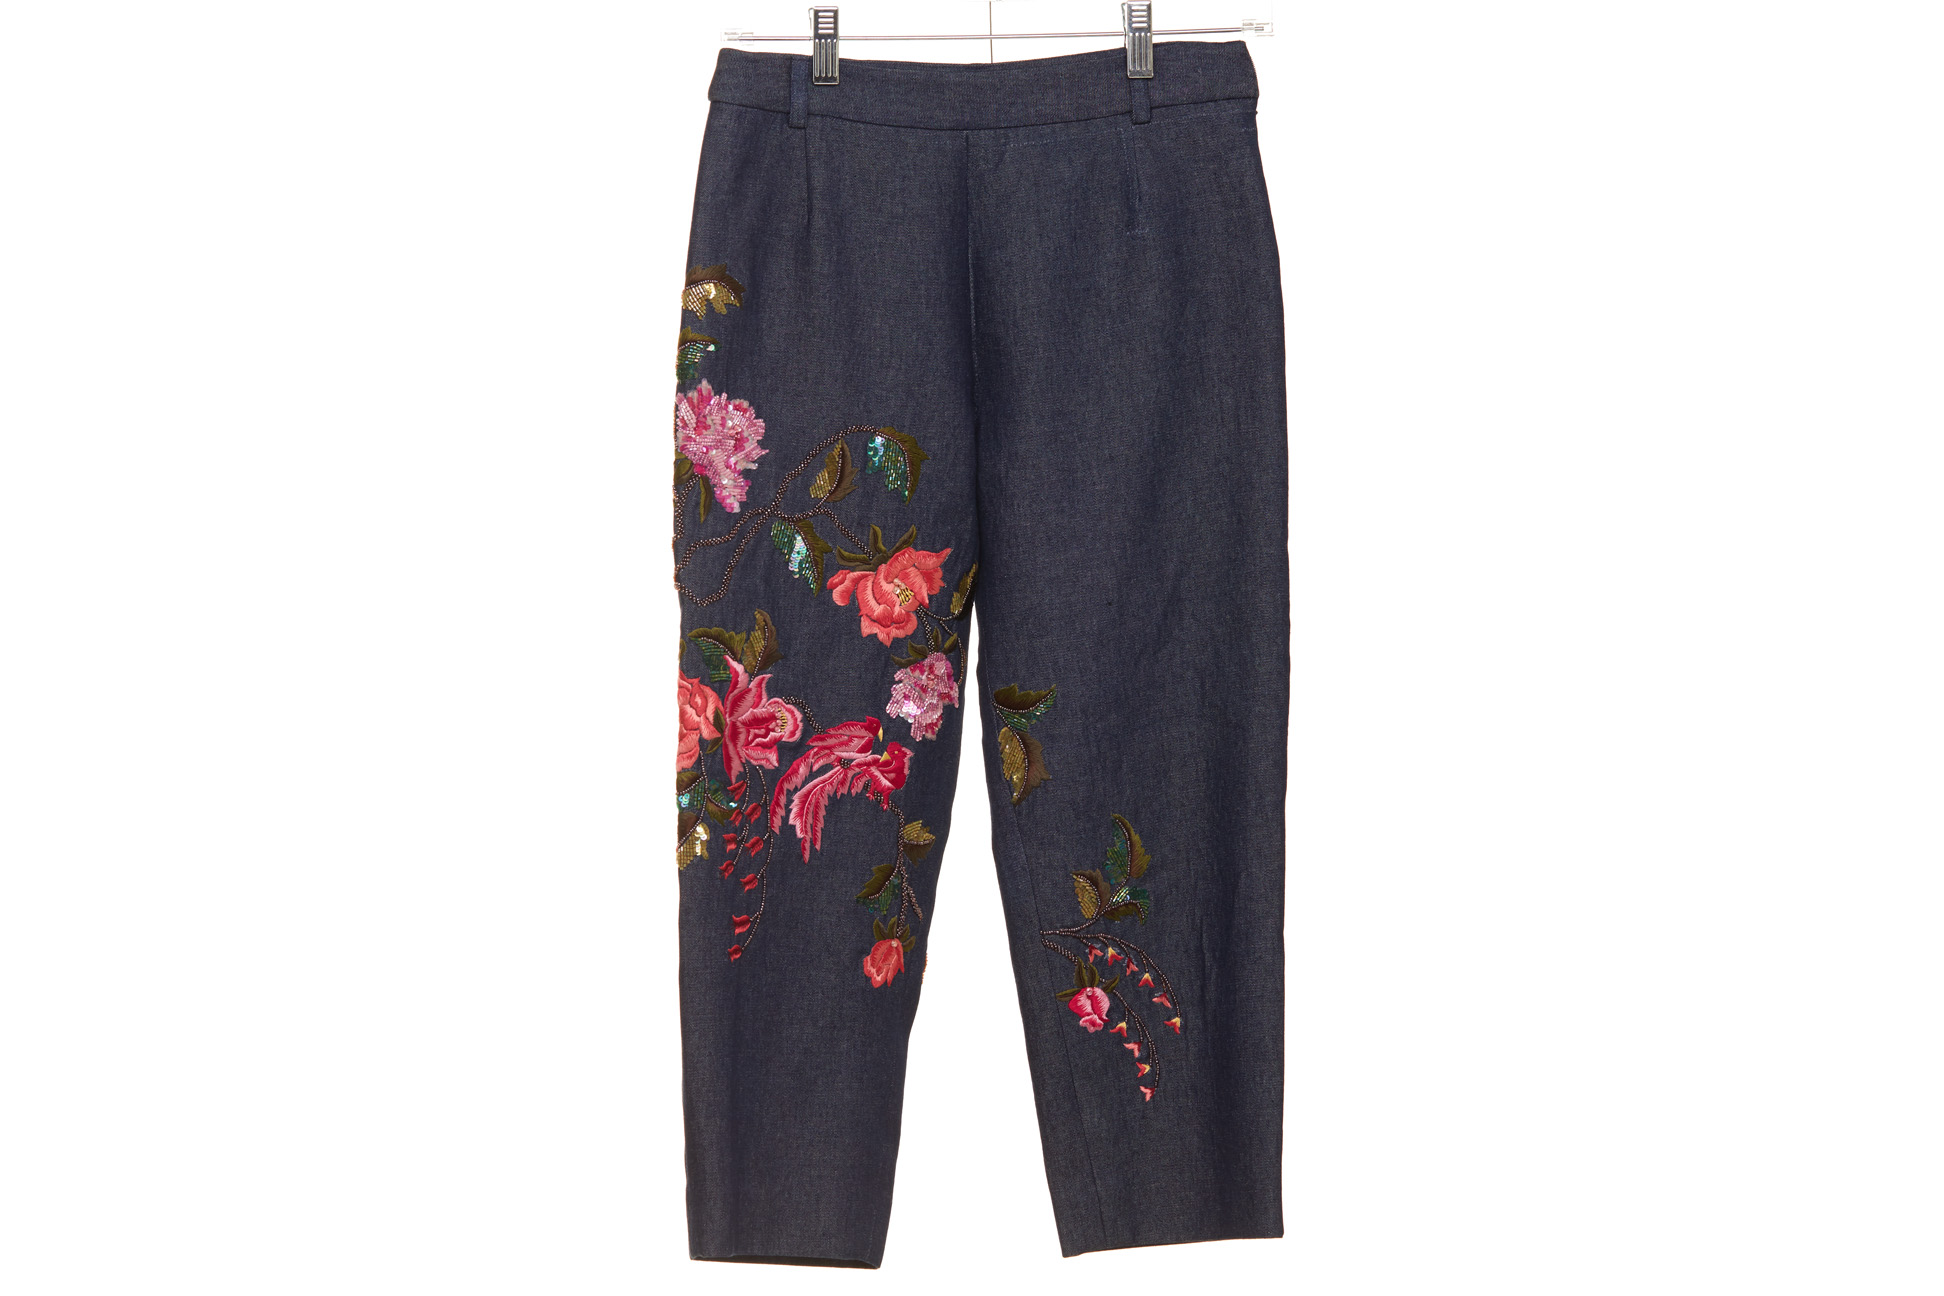 A PAIR OF DARK WASH FLORAL EMBROIDERED JEANS